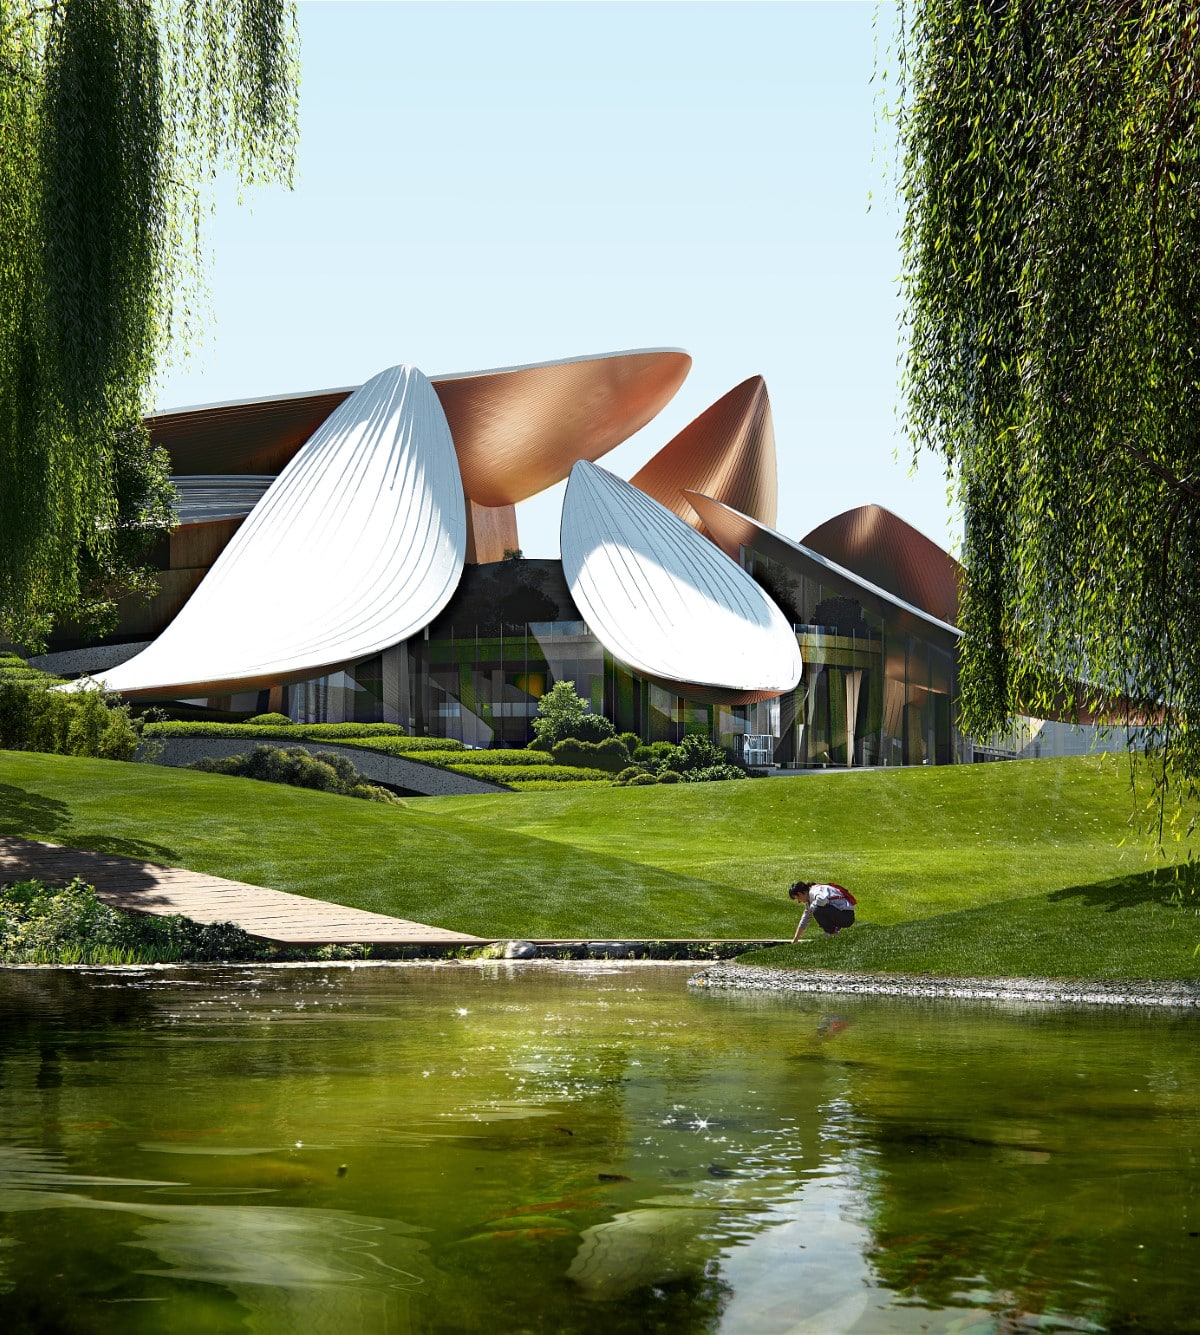 Anji Culture and Art Center by MAD